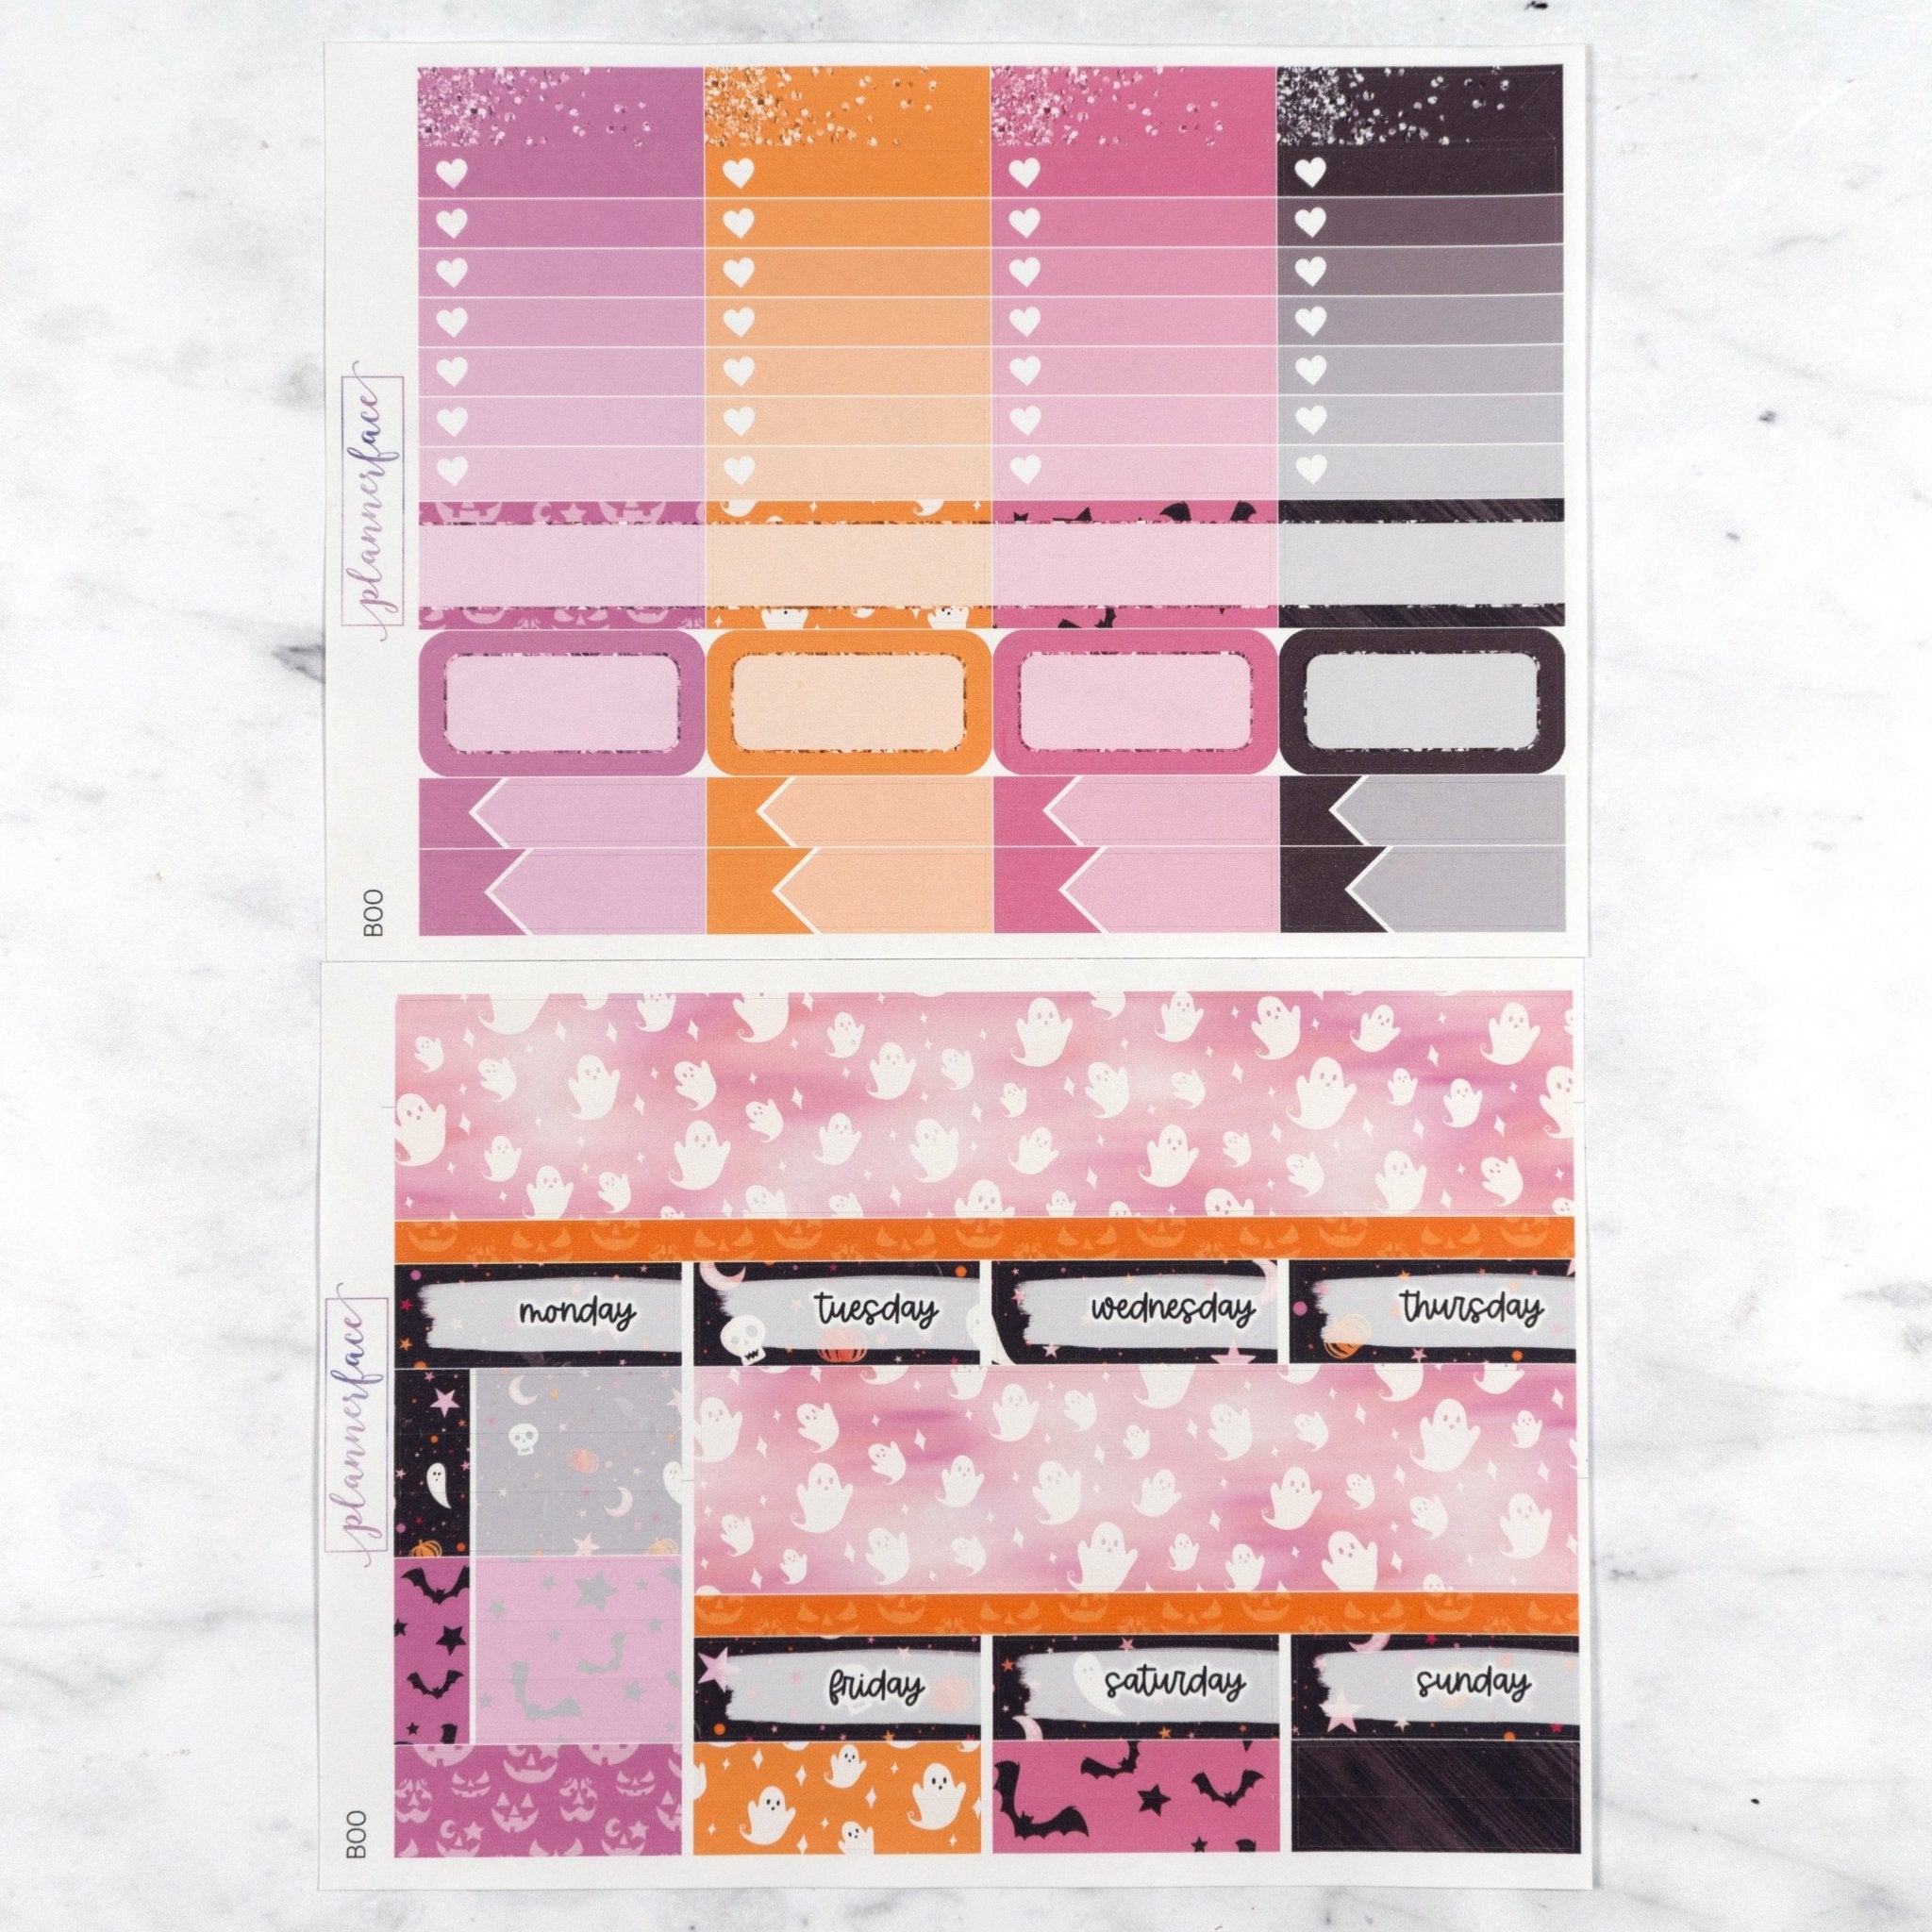 Boo Weekly Kit by Plannerface